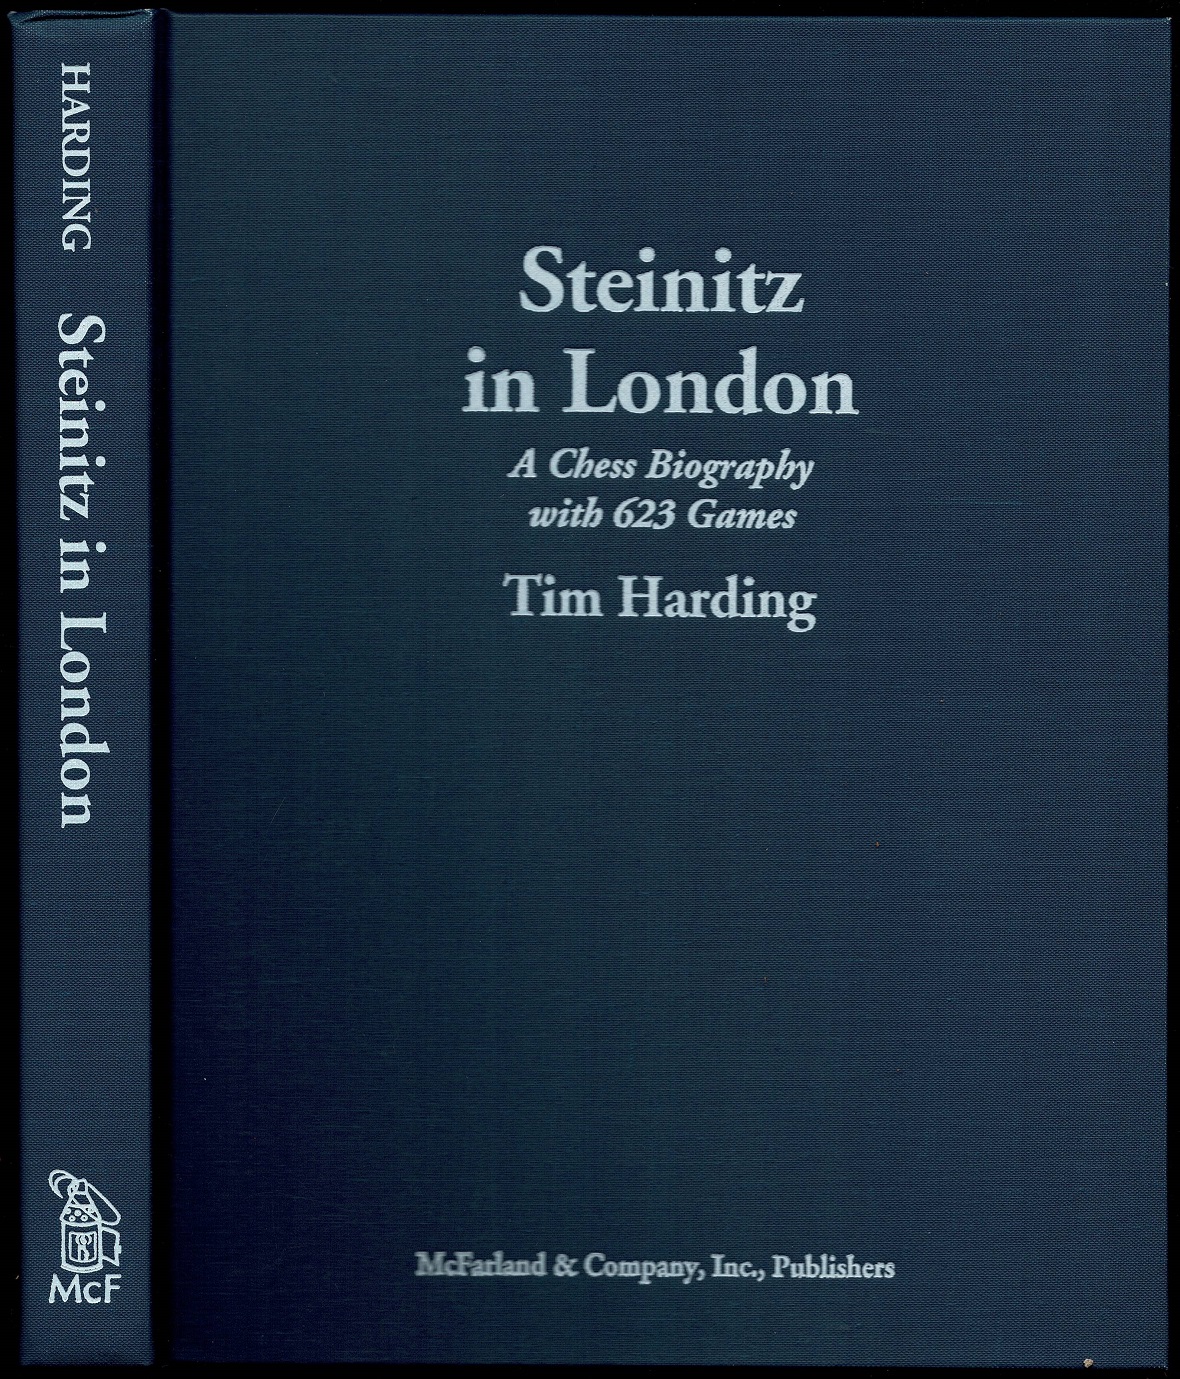 Steinitz in London: A Chess Biography with 623 Games - Timothy David Harding (1948- )